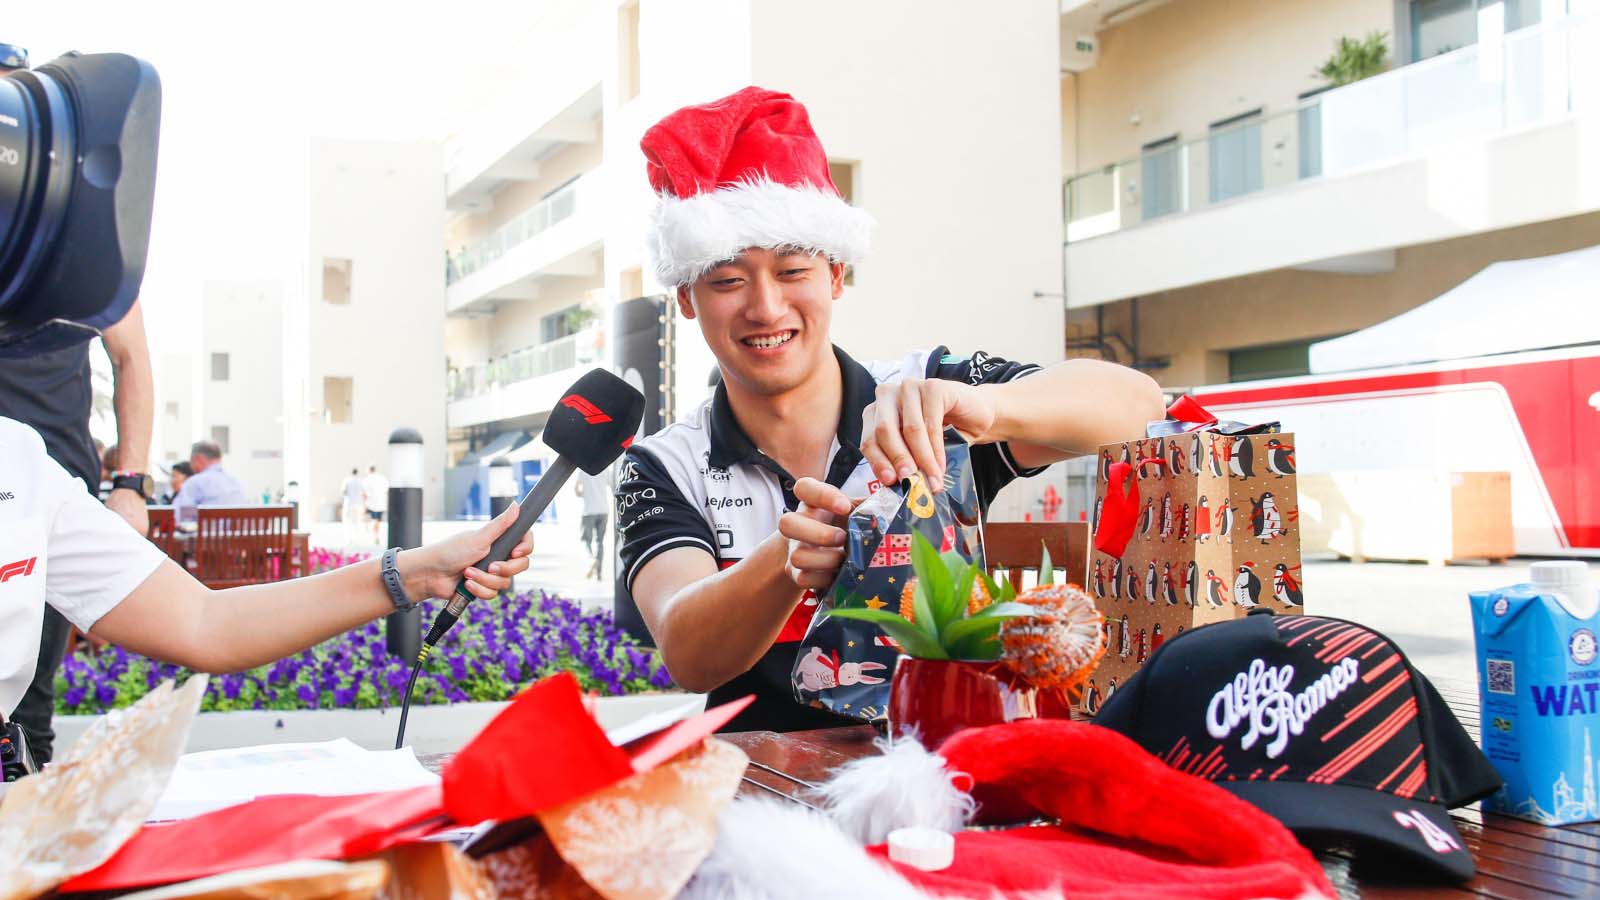 F1 Secret Santa Drivers reveal mystery gifts they have received from